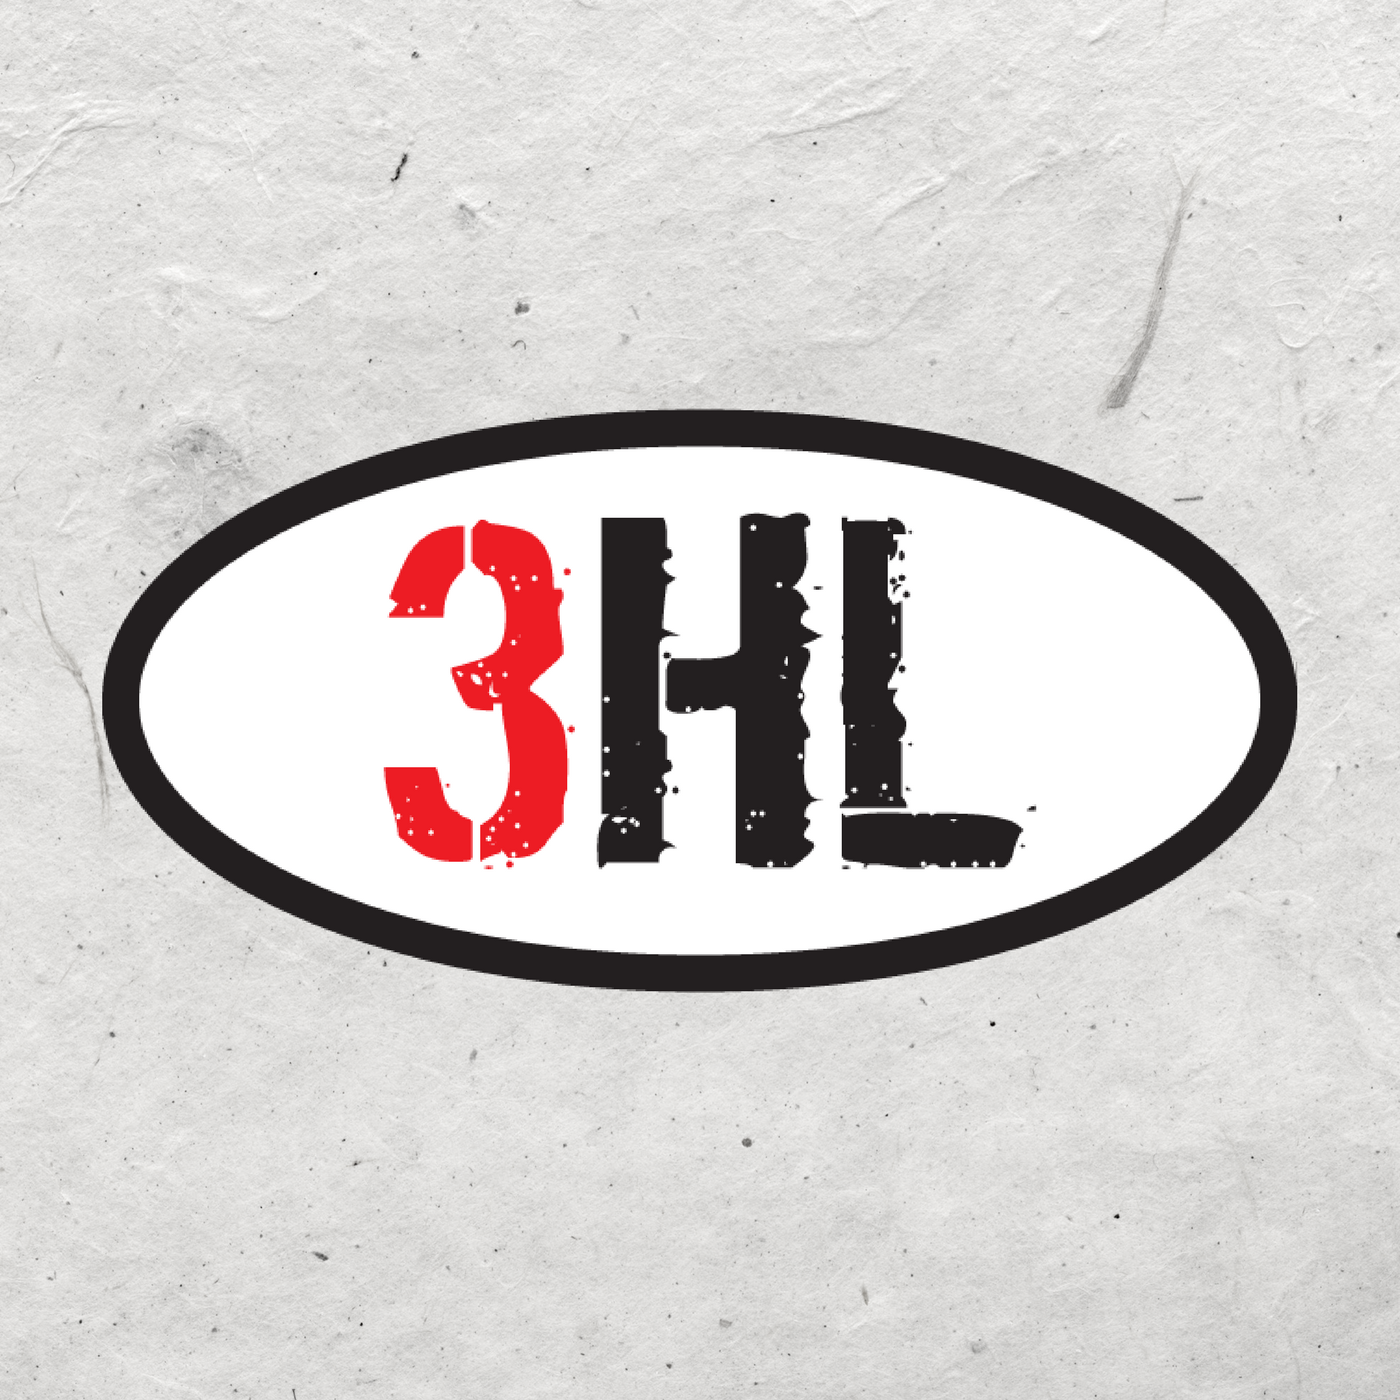 3HL Hour 2: Calgary and Nashville are going to score goals